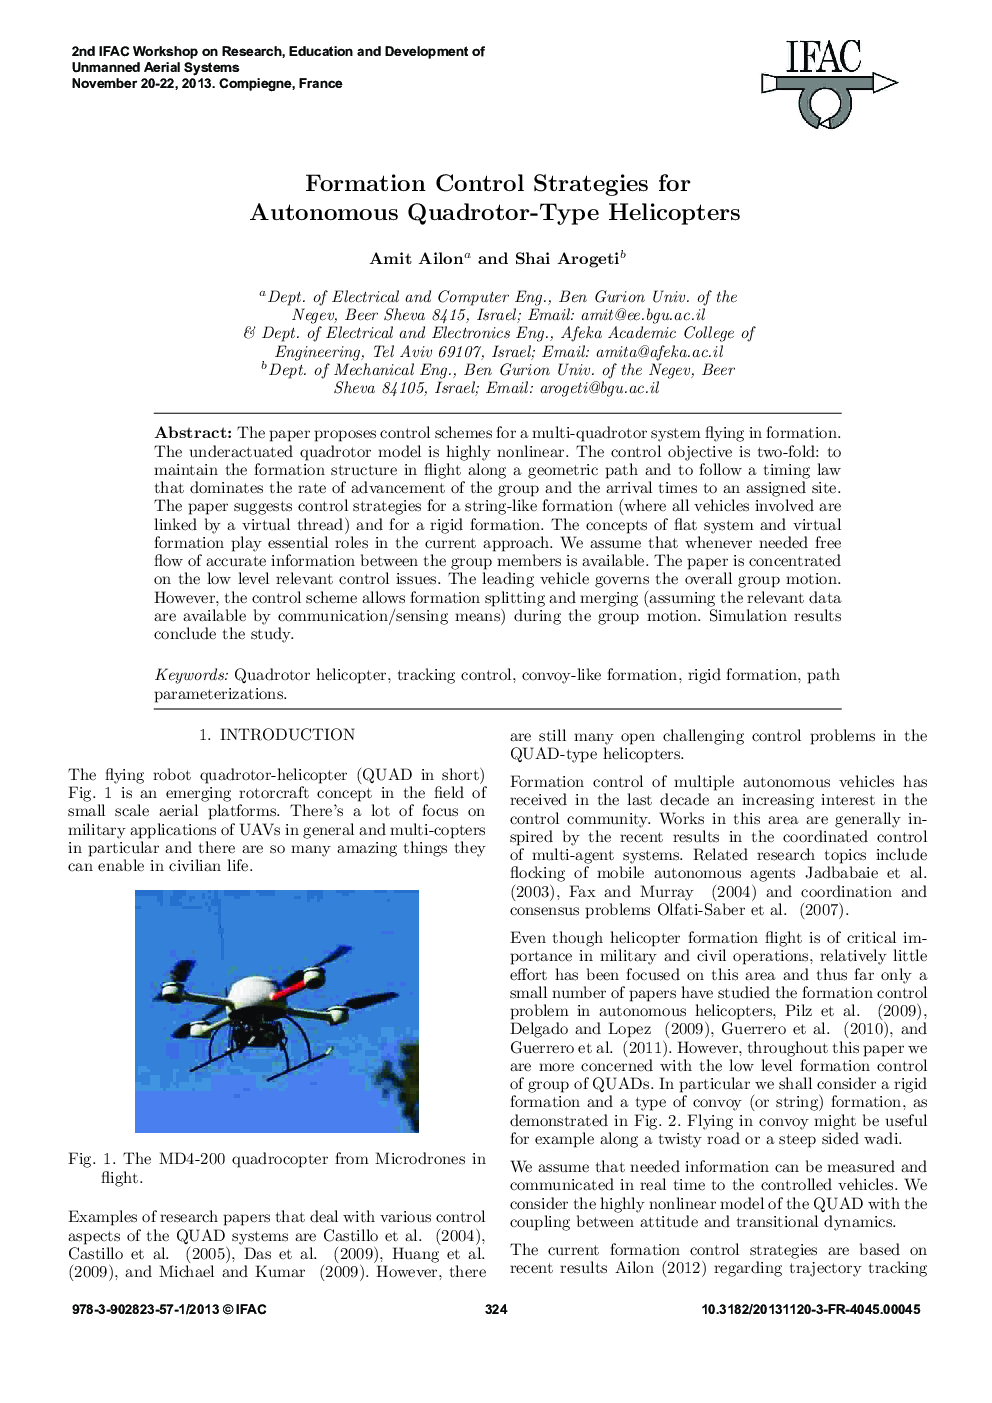 Formation Control Strategies for Autonomous Quadrotor-Type Helicopters